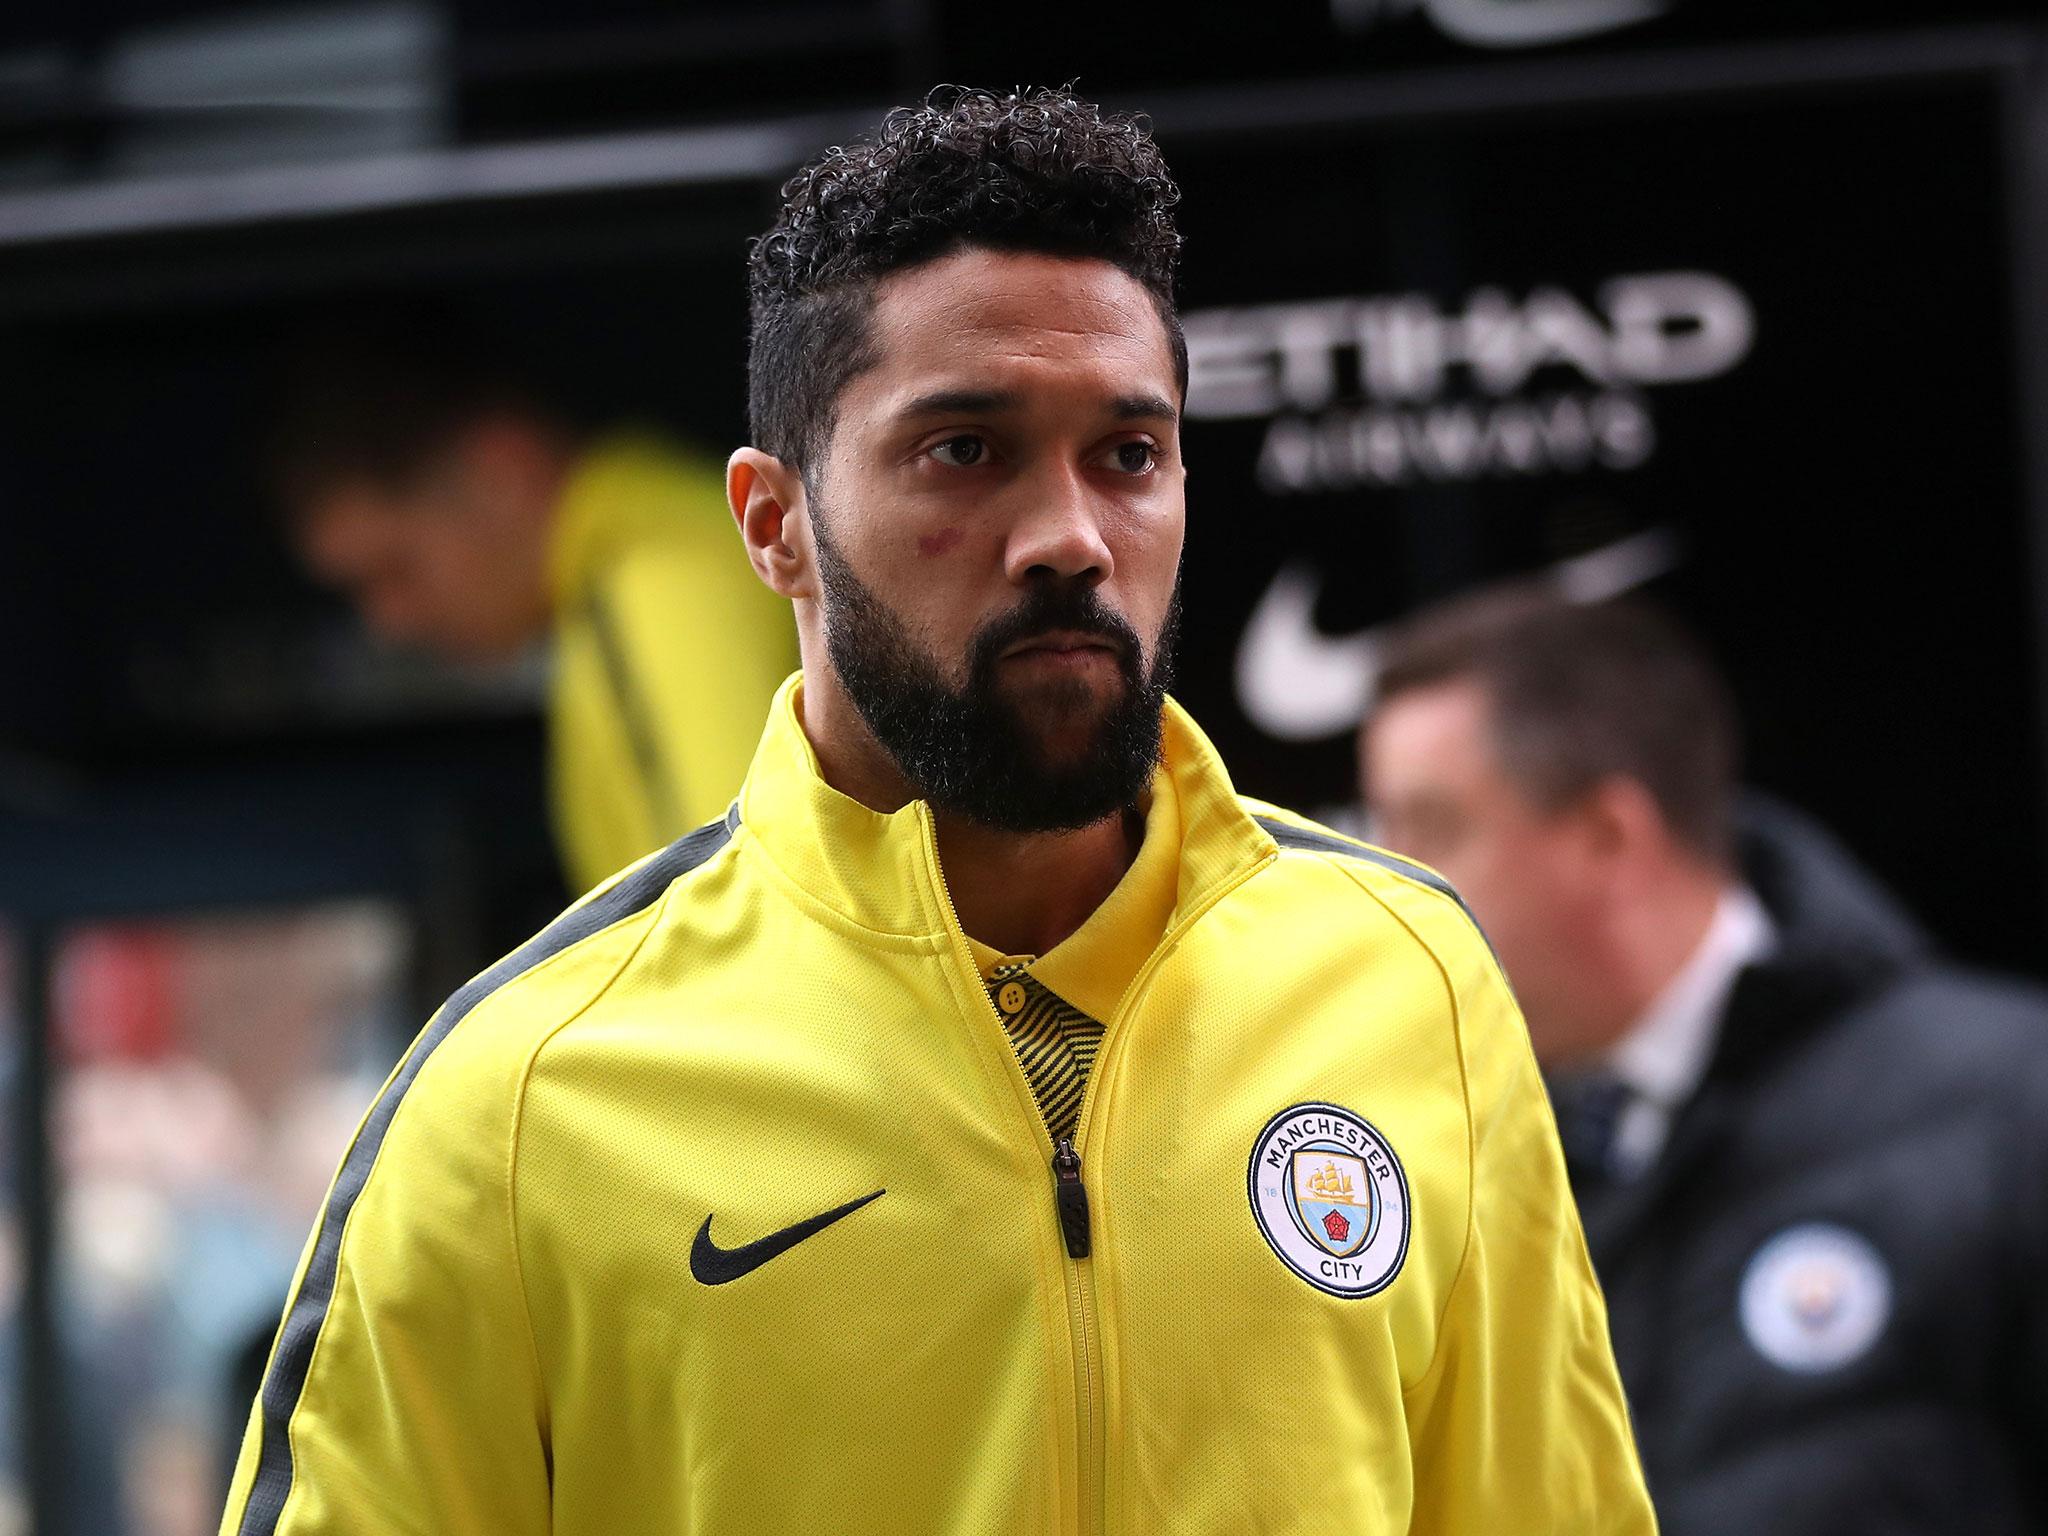 Clichy joined City from Arsenal in 2011